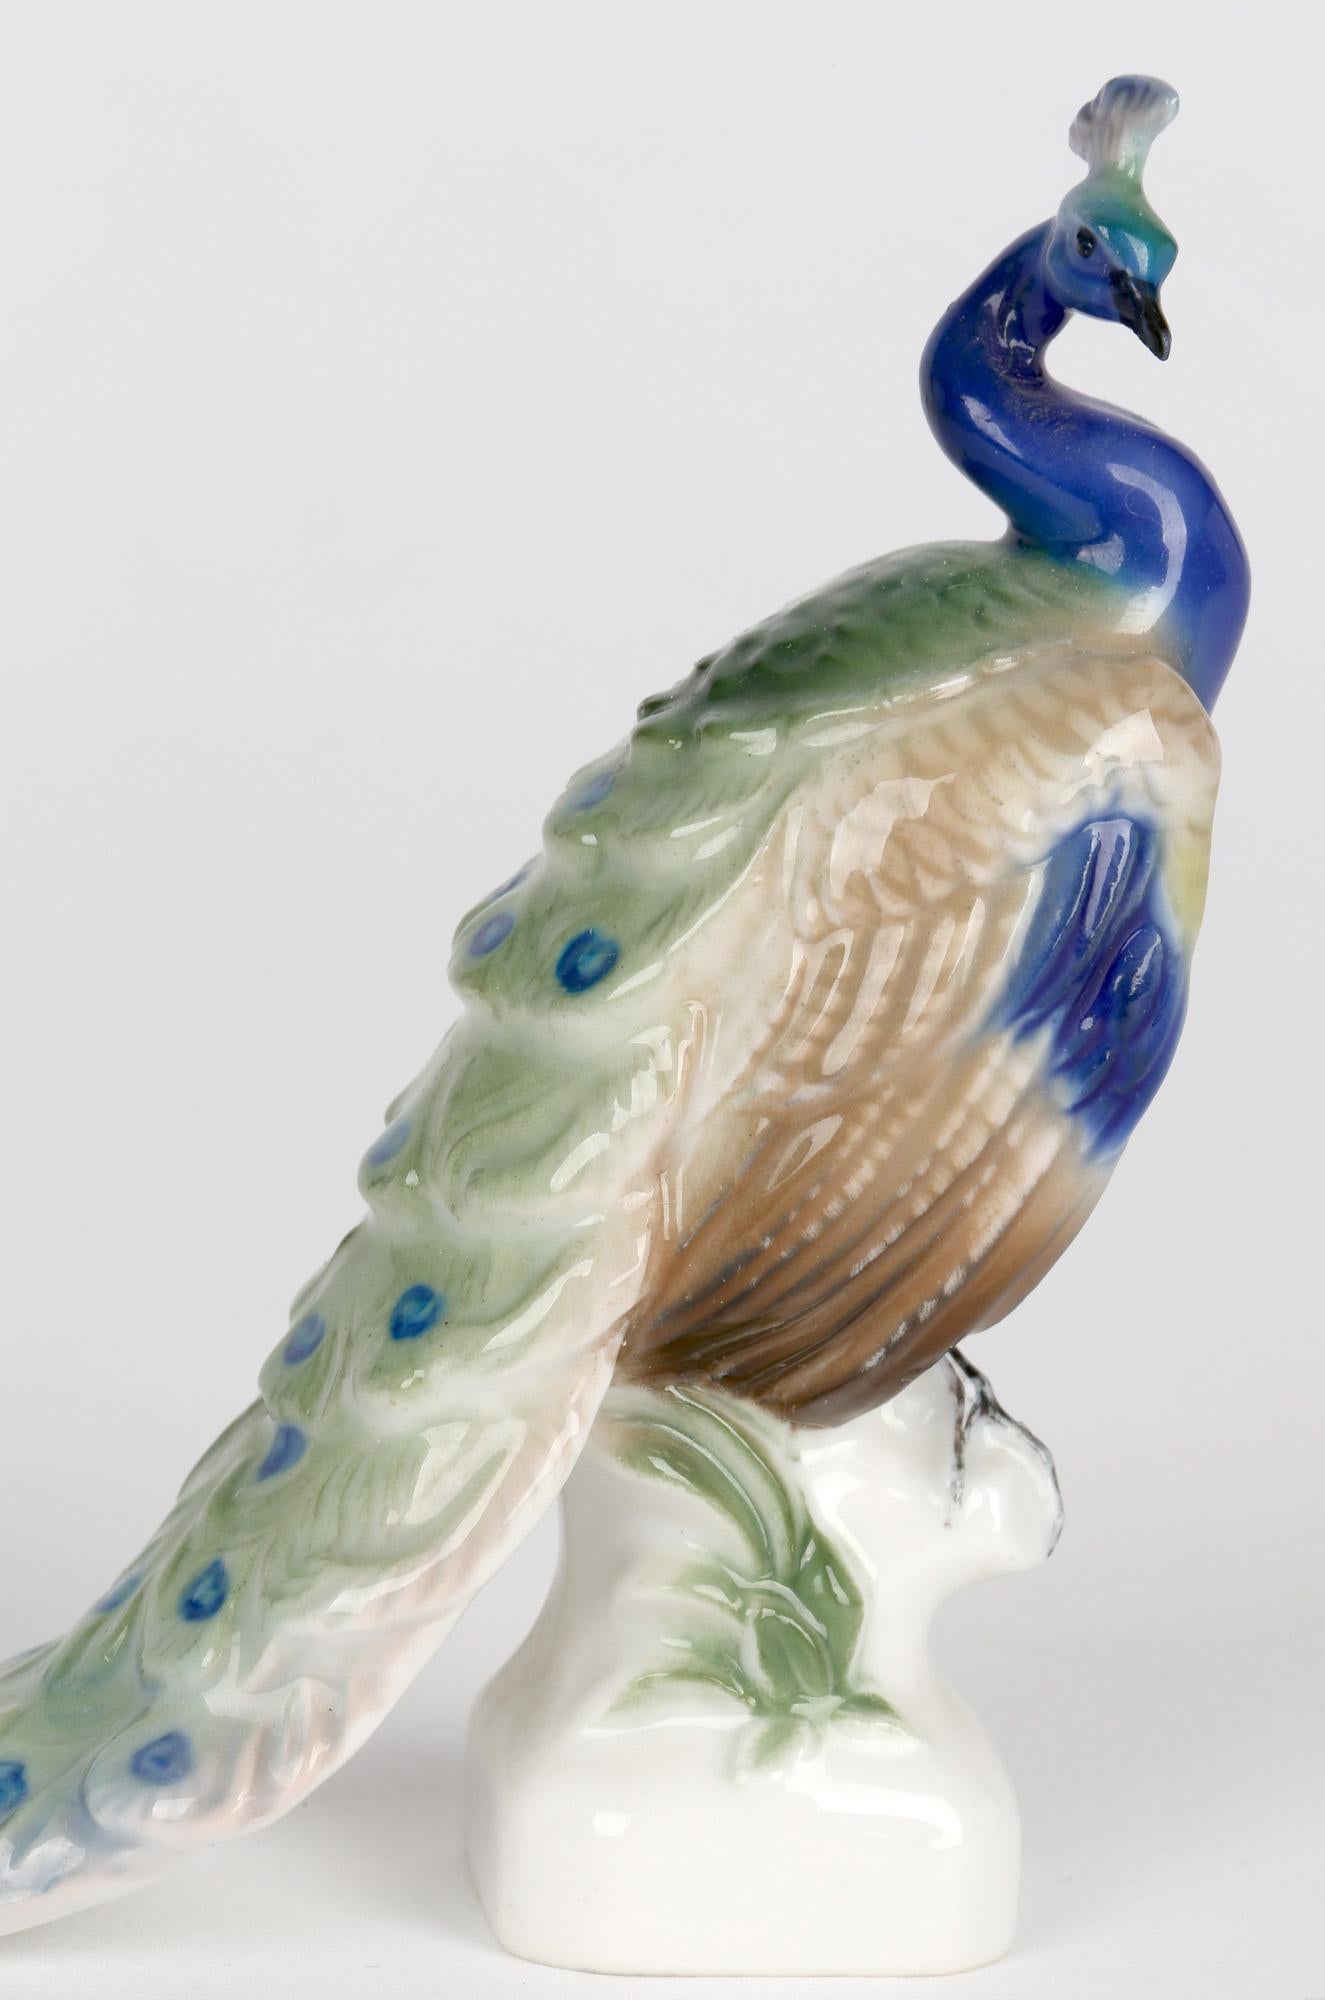 A very fine mid-century German porcelain figure of a peacock on a perch made by Rosenthal and dating from 1955. The peacock stands raised on a small square shaped base molded with a wooden on which the bird is perched. The peacock is very finely